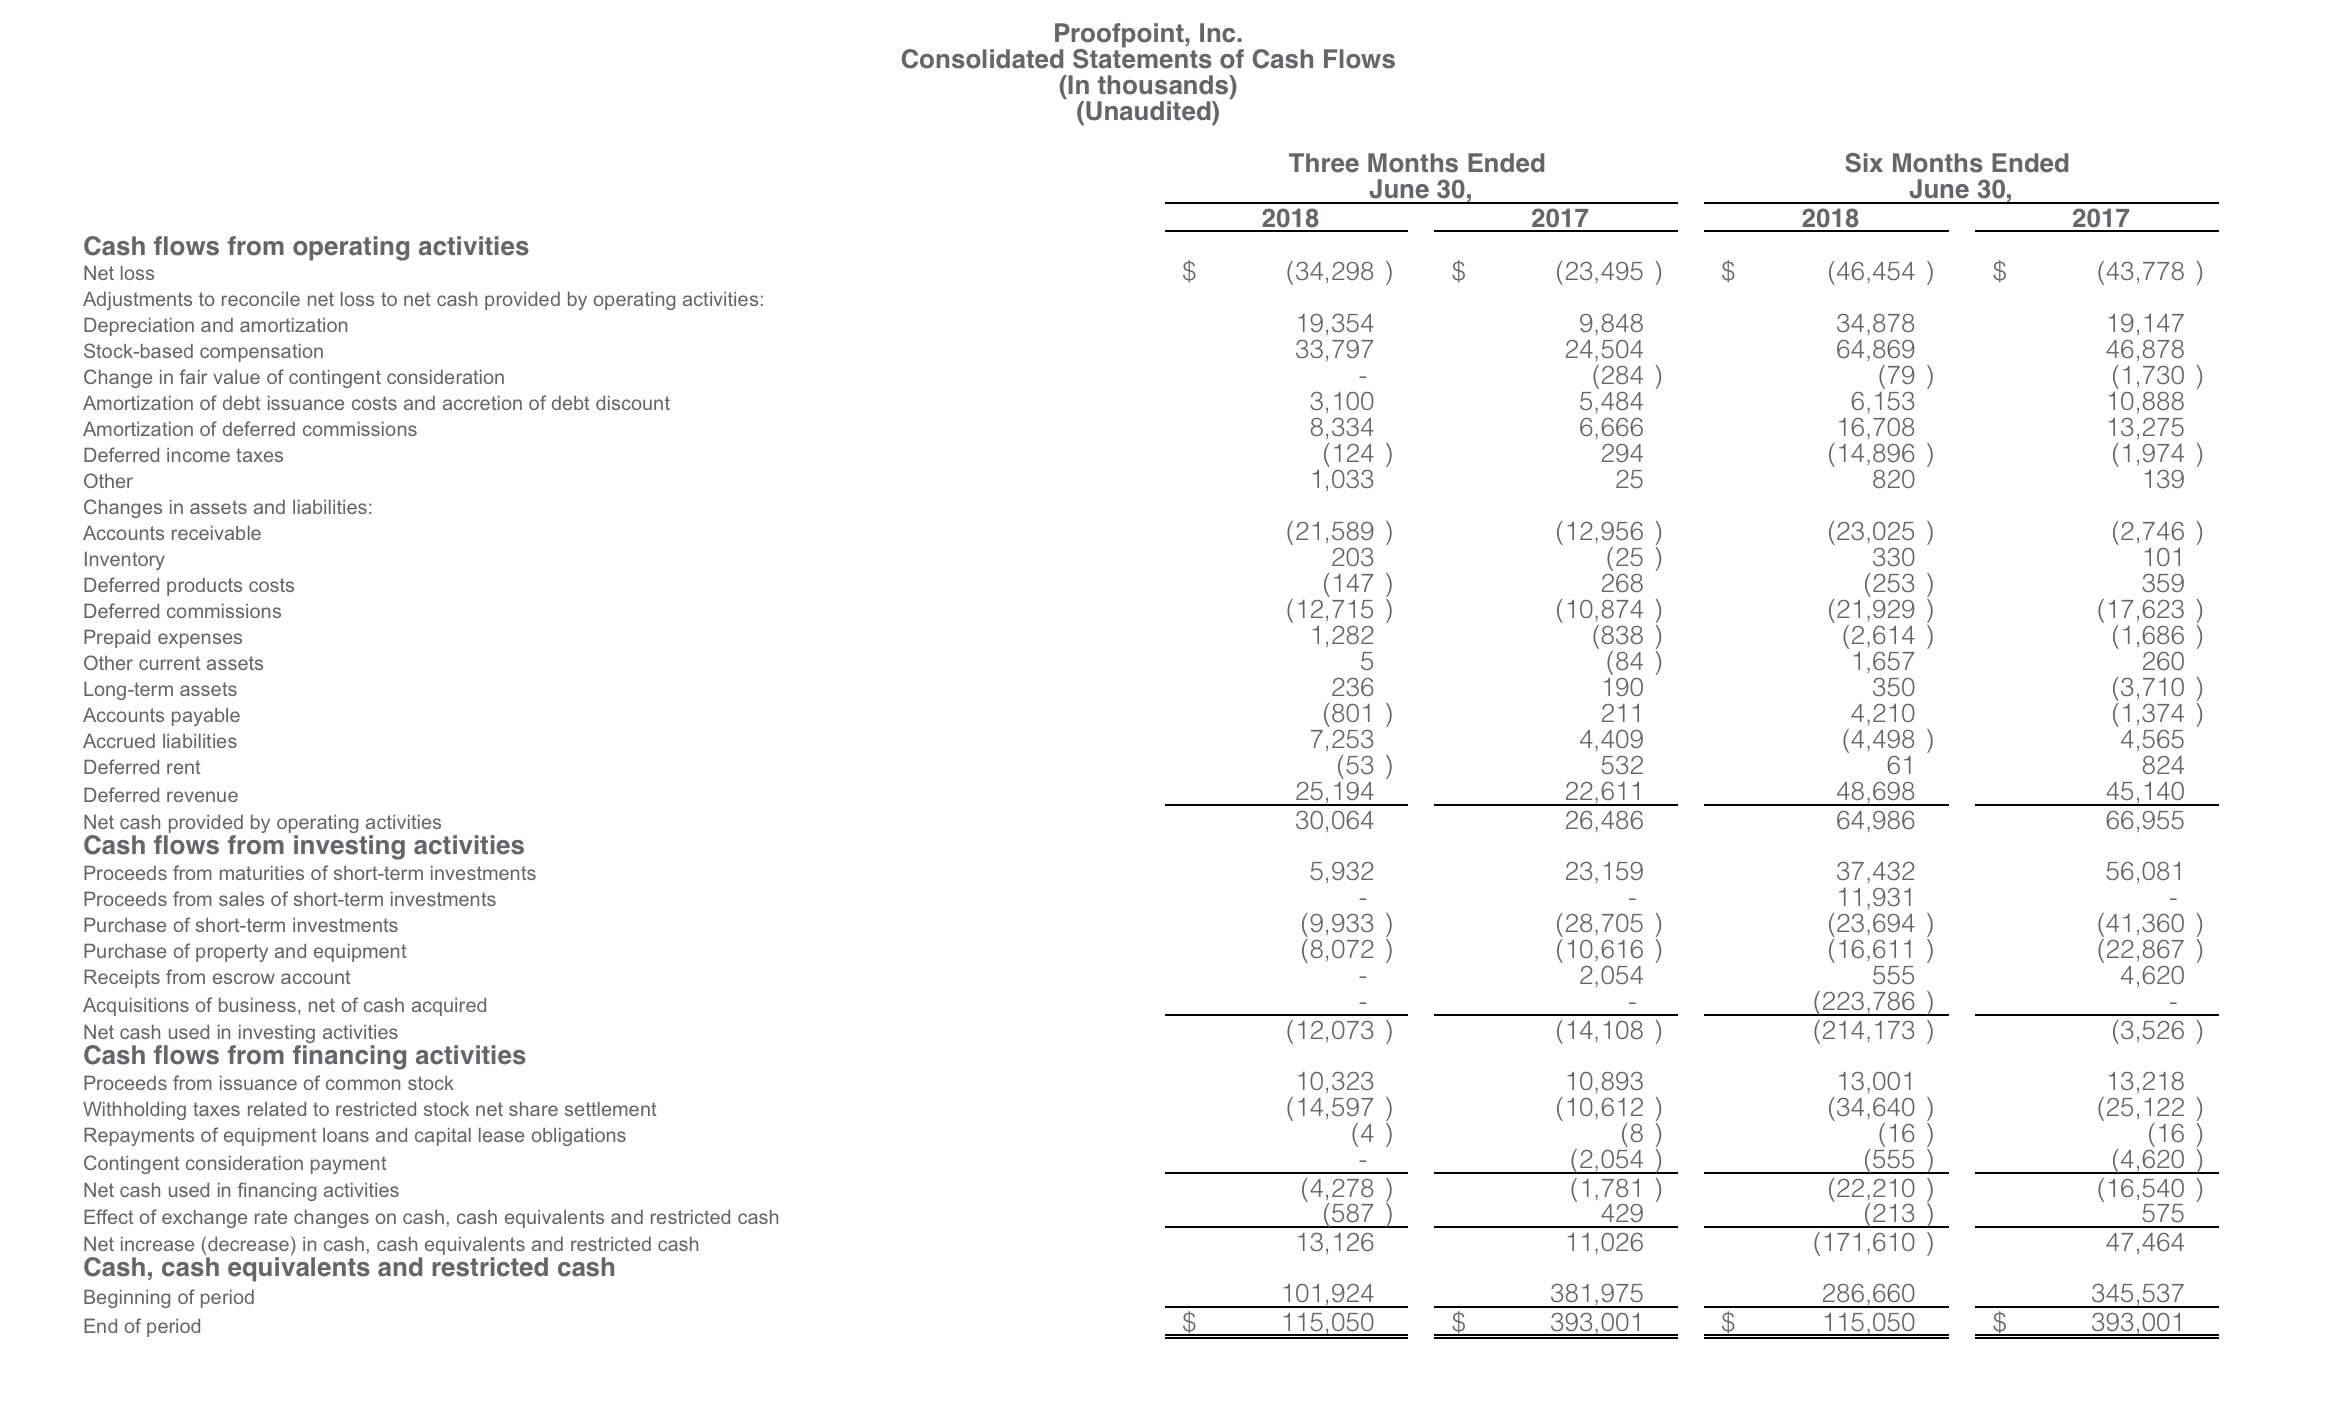 Proofpoint consolidated statements of cash flows report